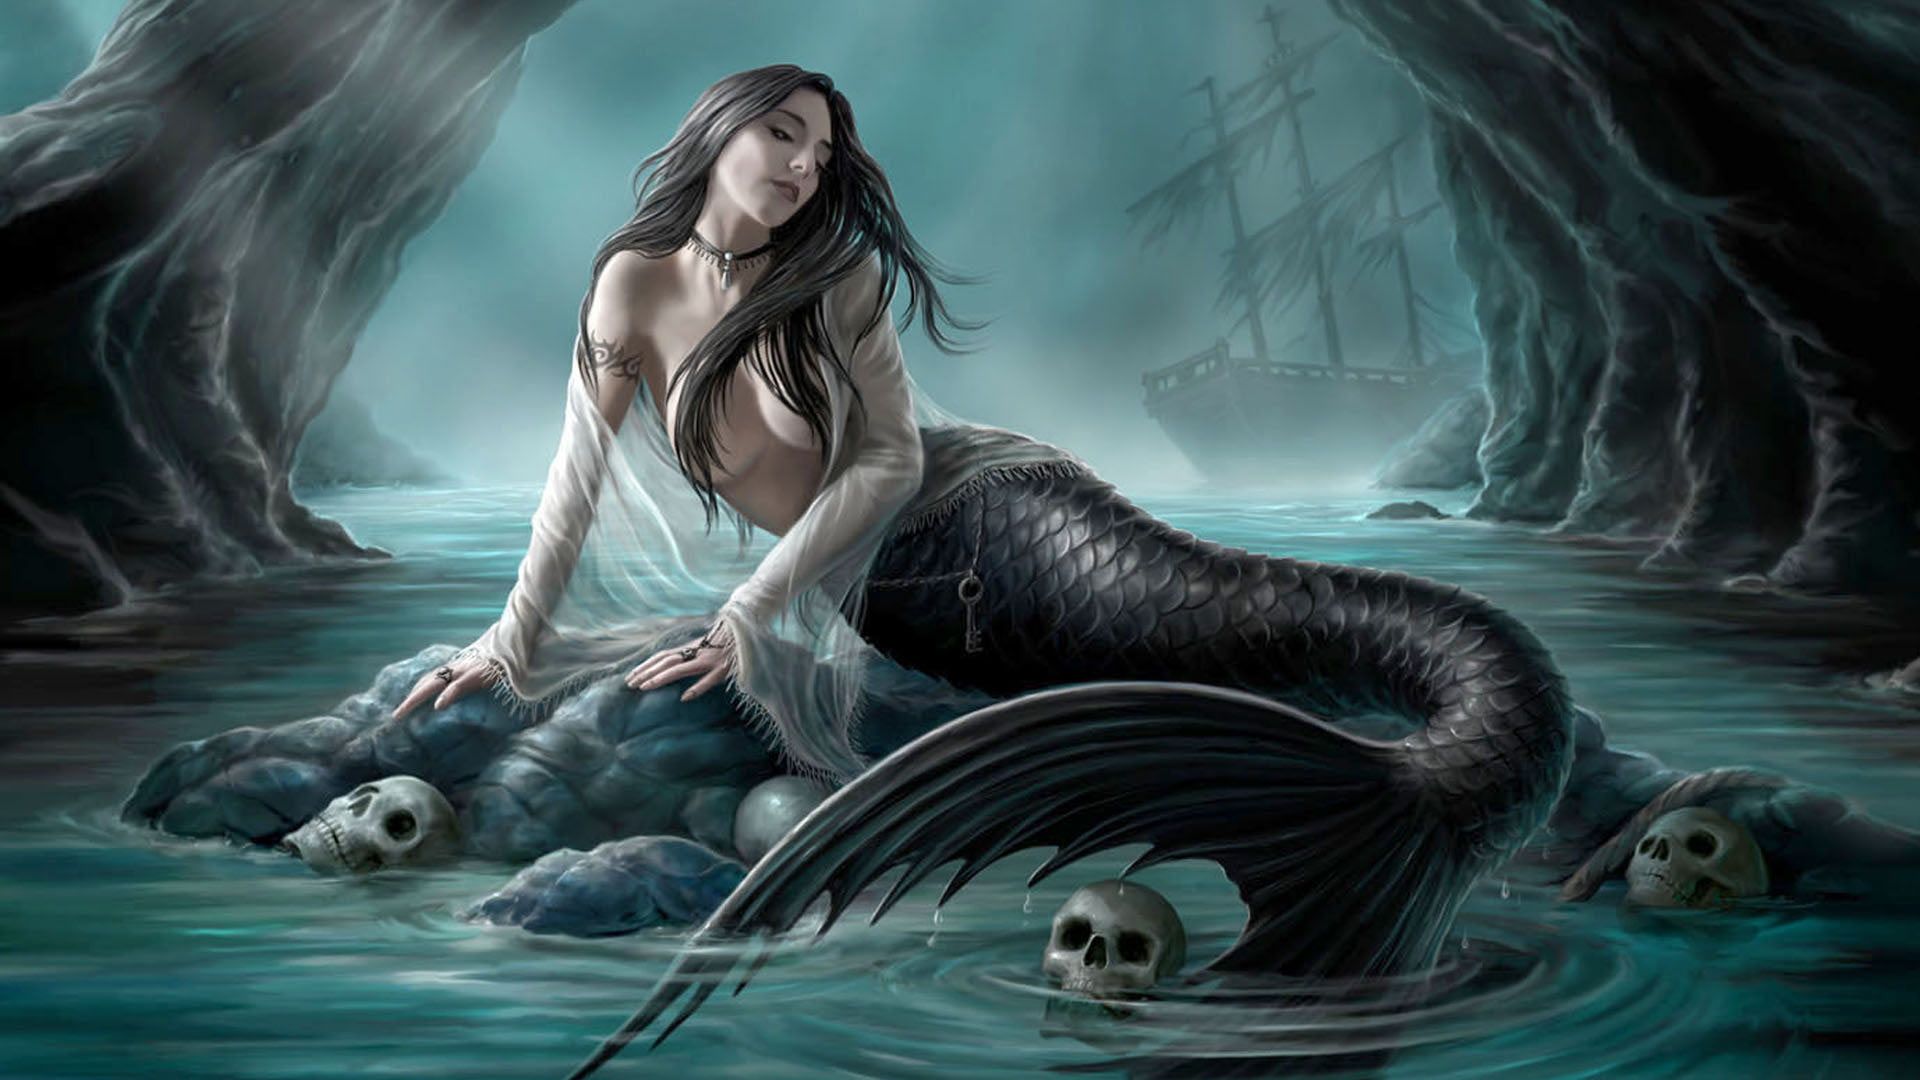 Scared Mermaid, High Definition, High Quality, Widescreen